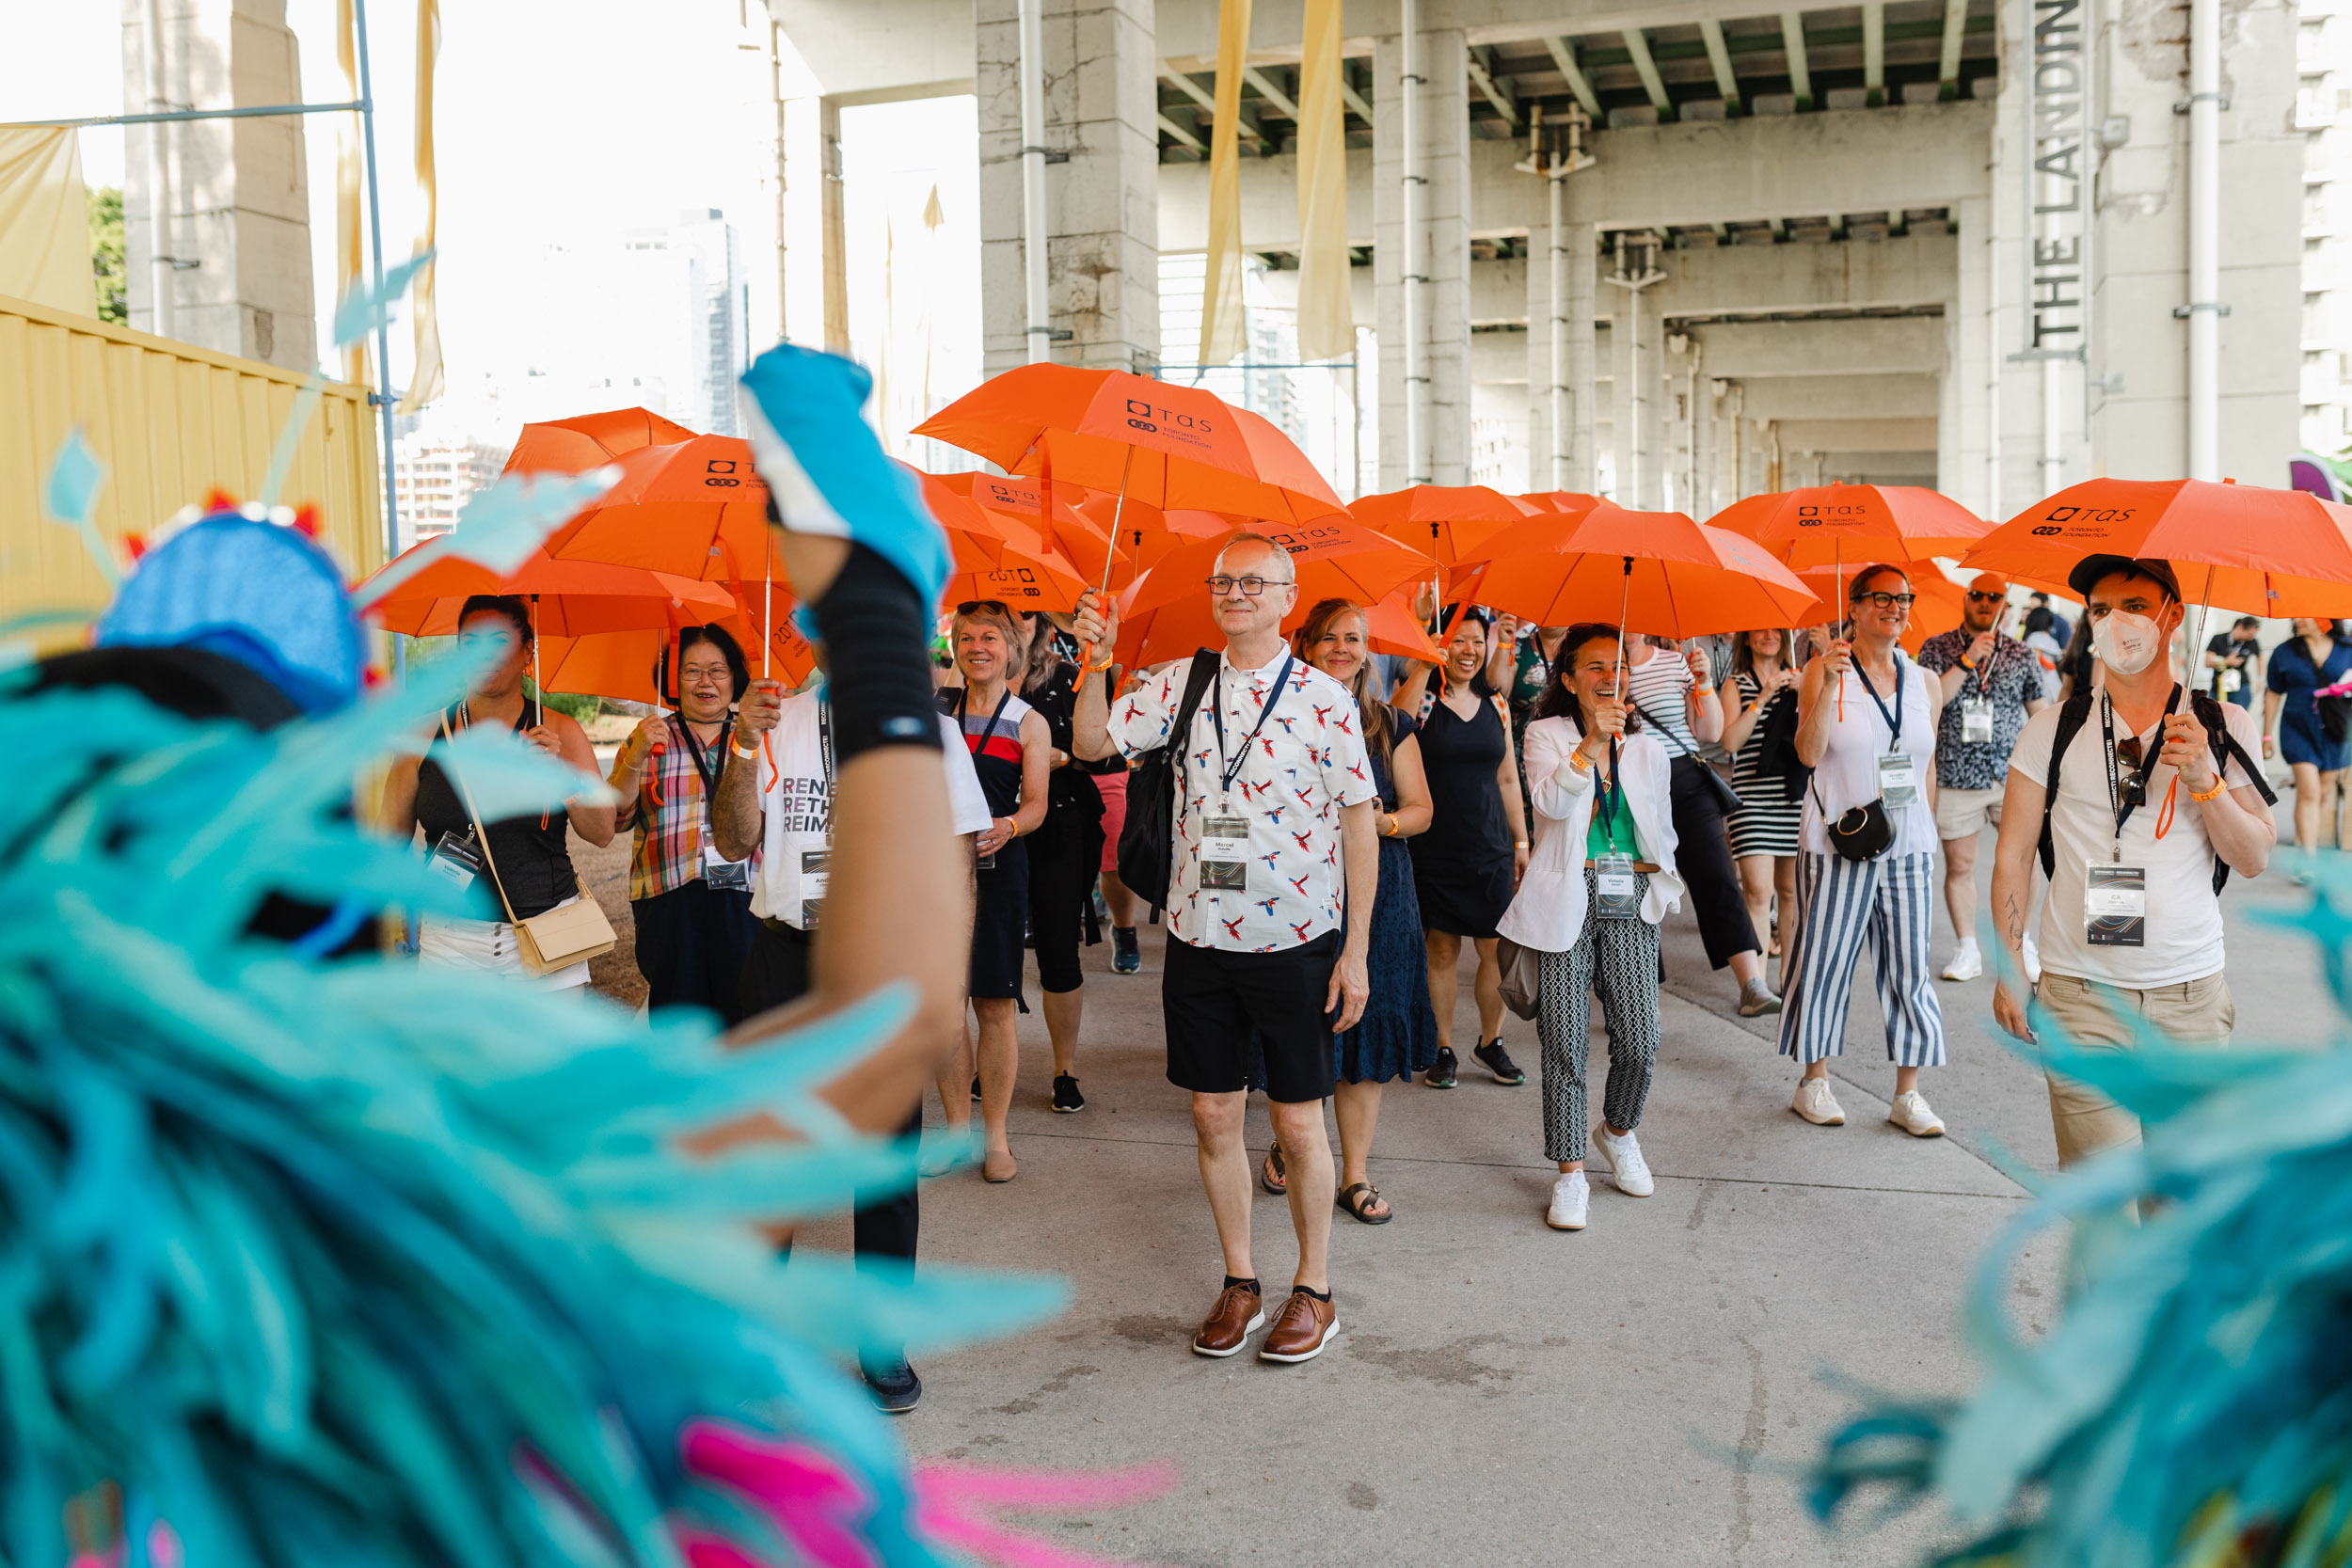 Conference attendees with orange umbrellas.